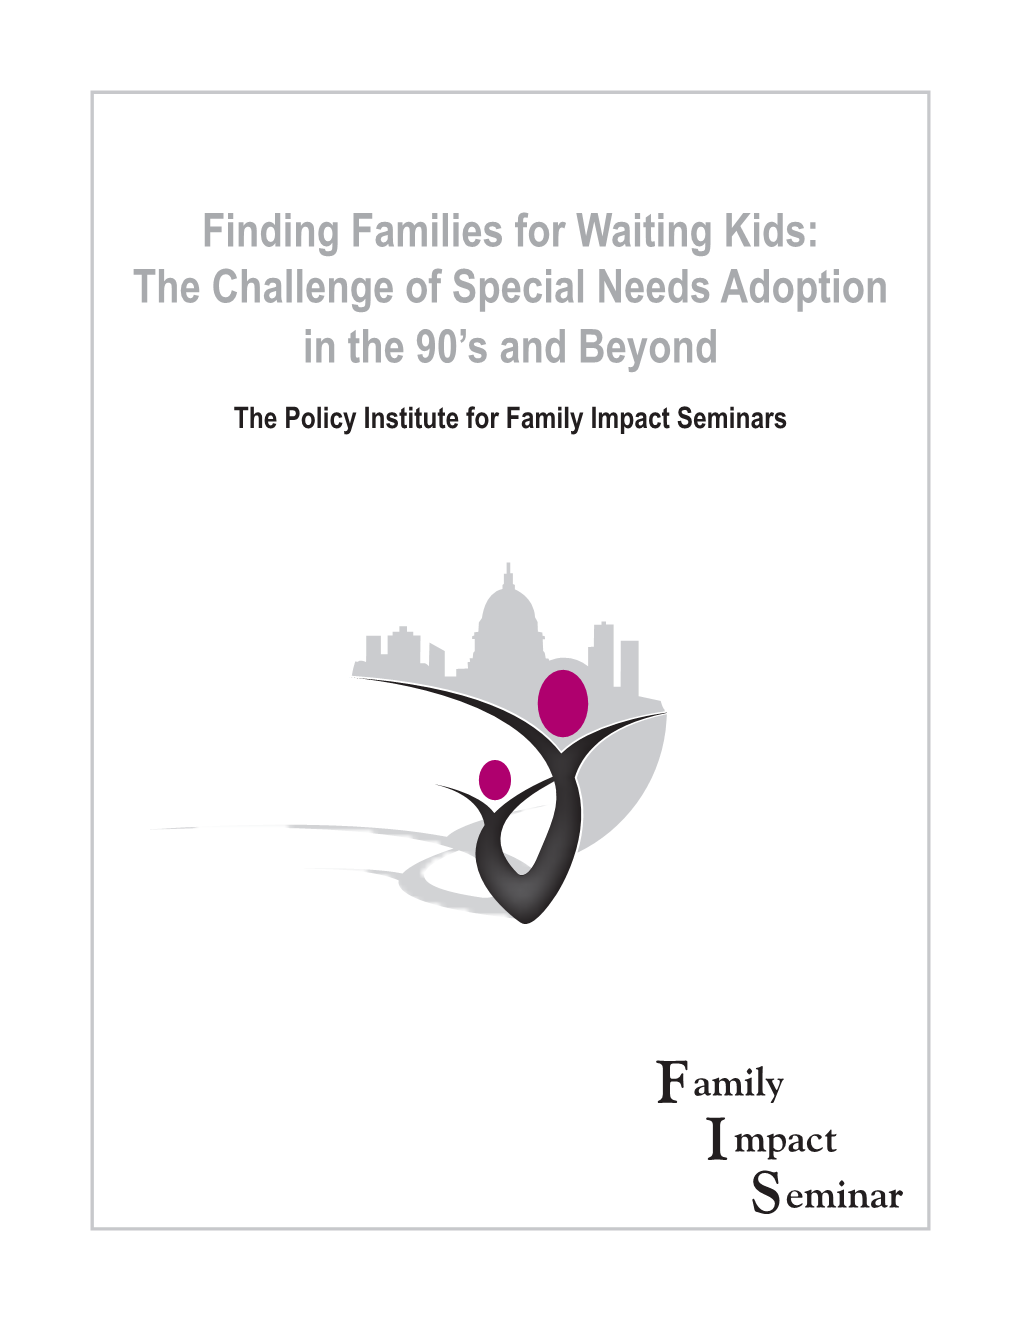 The Challenge of Special Needs Adoption in the 90'S and Beyond (Pdf)